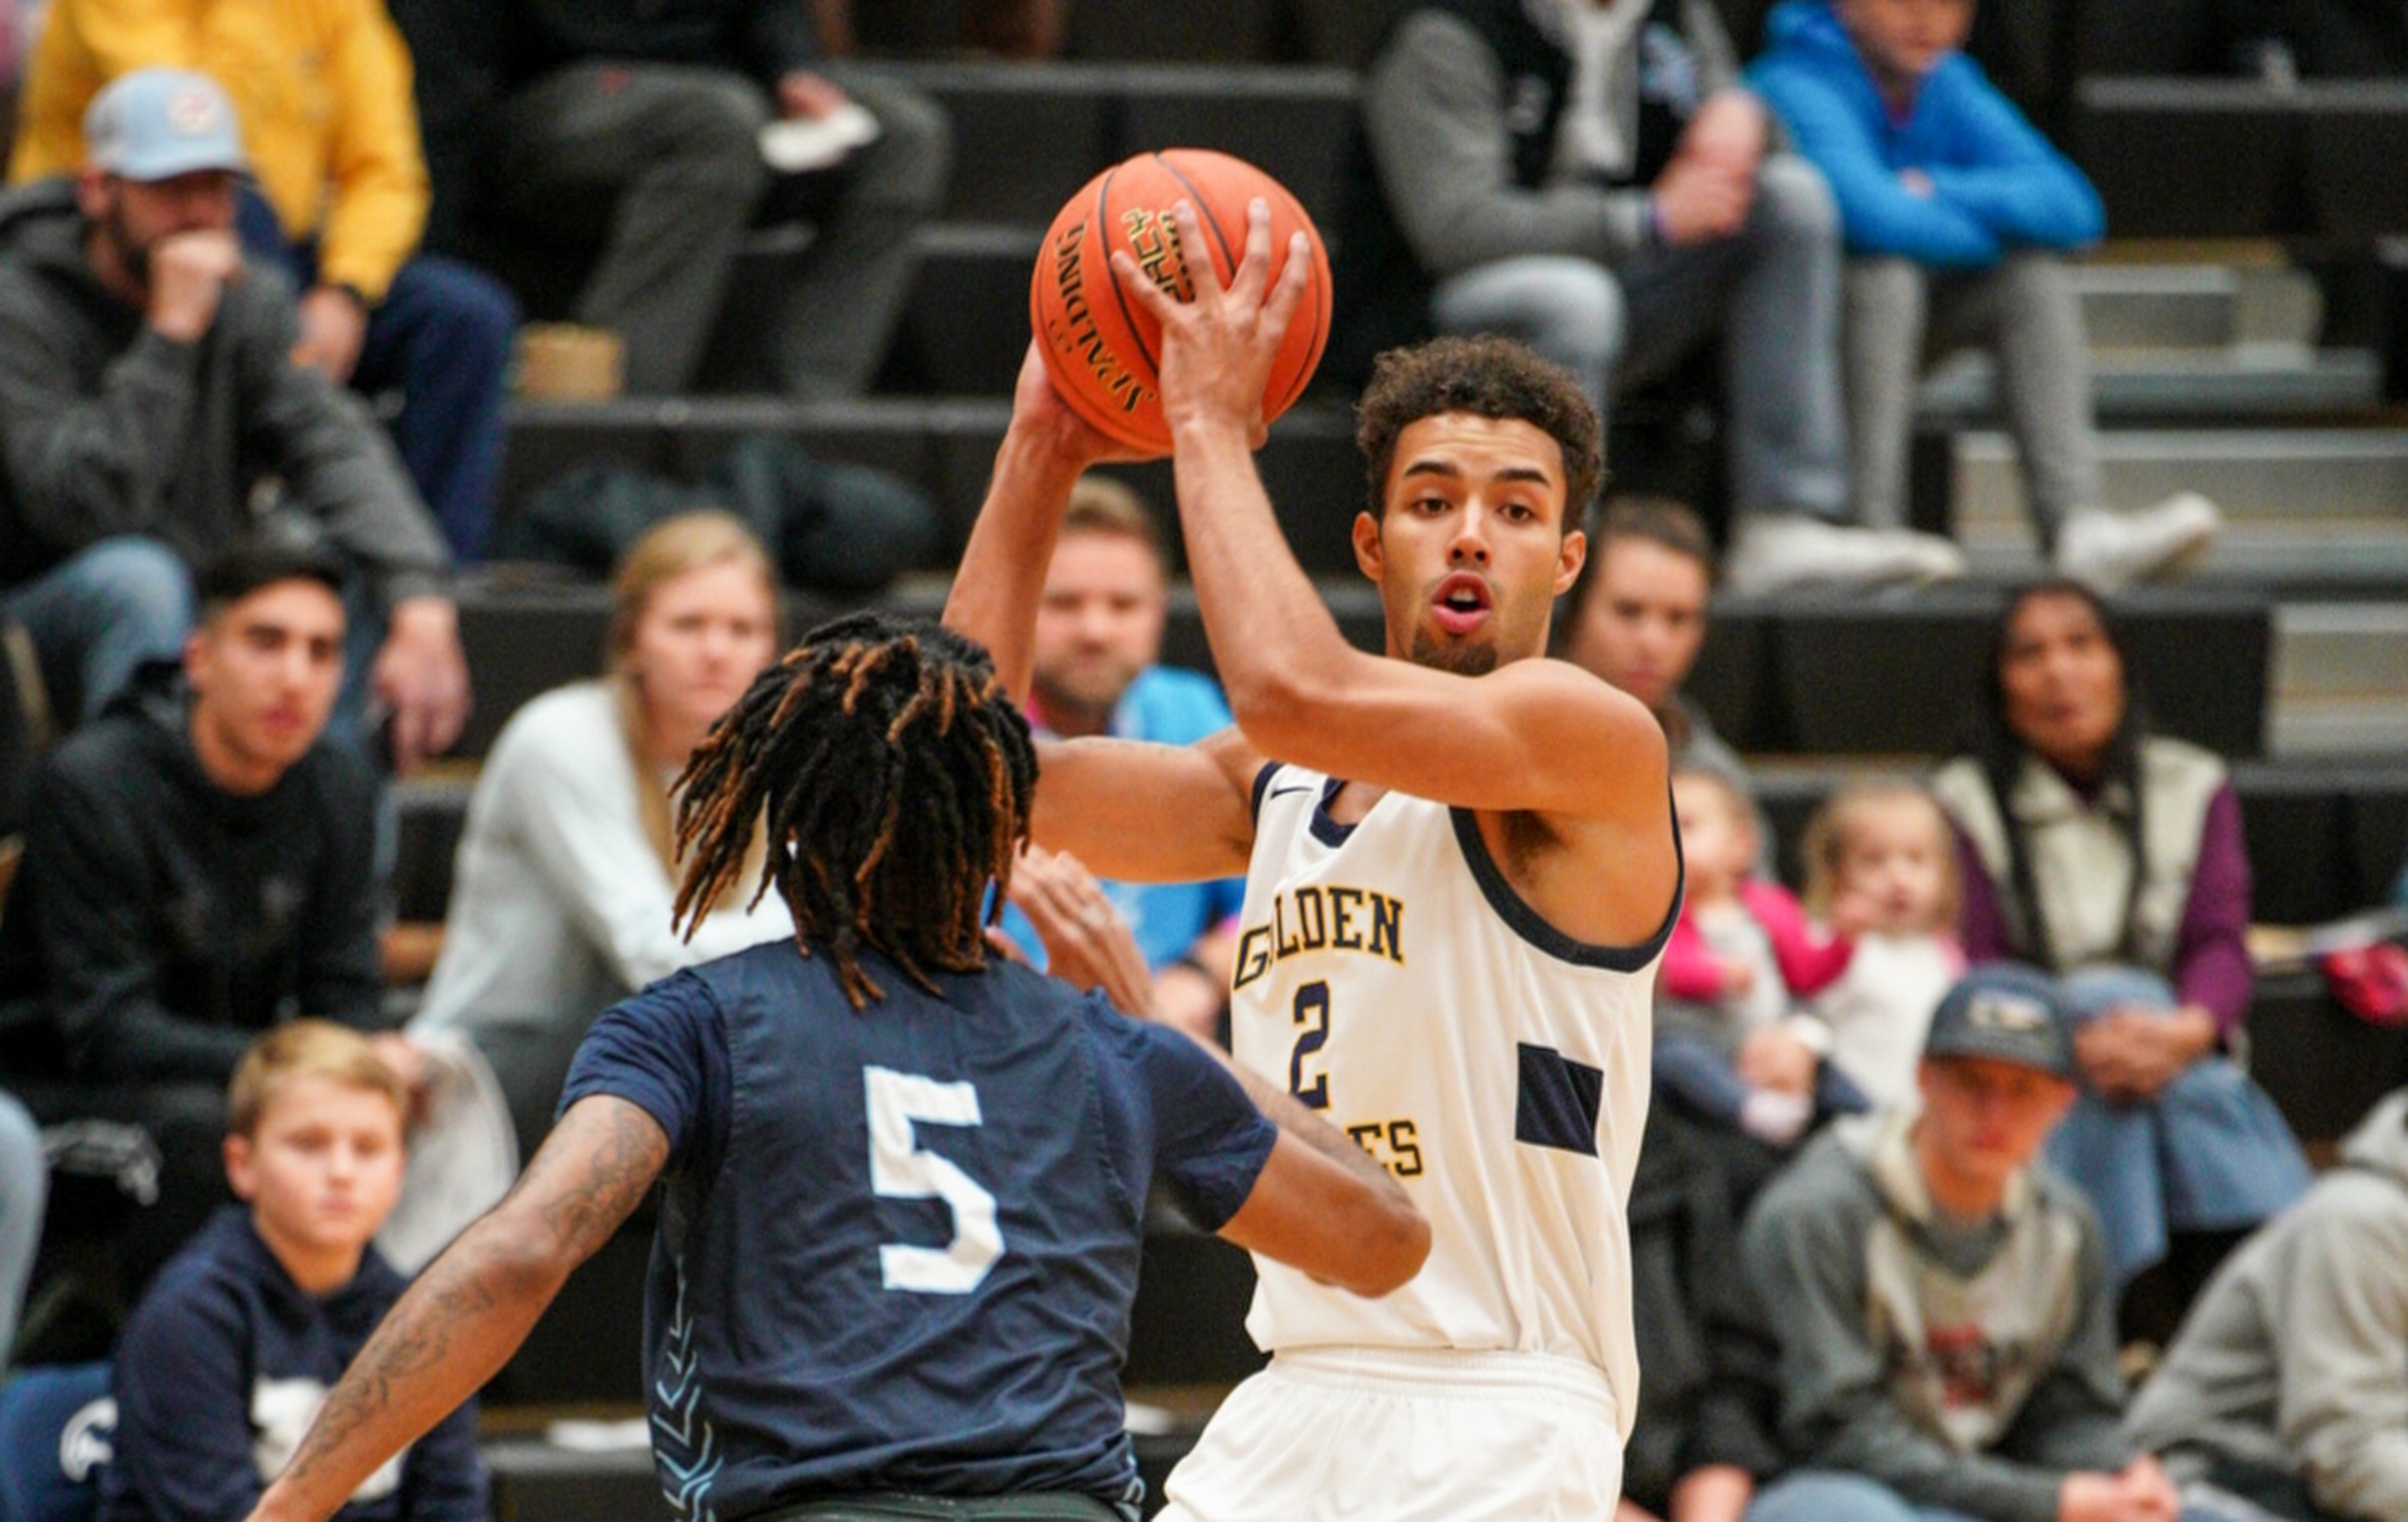 LCCC Men rally back against WWCC for an 88-86 win